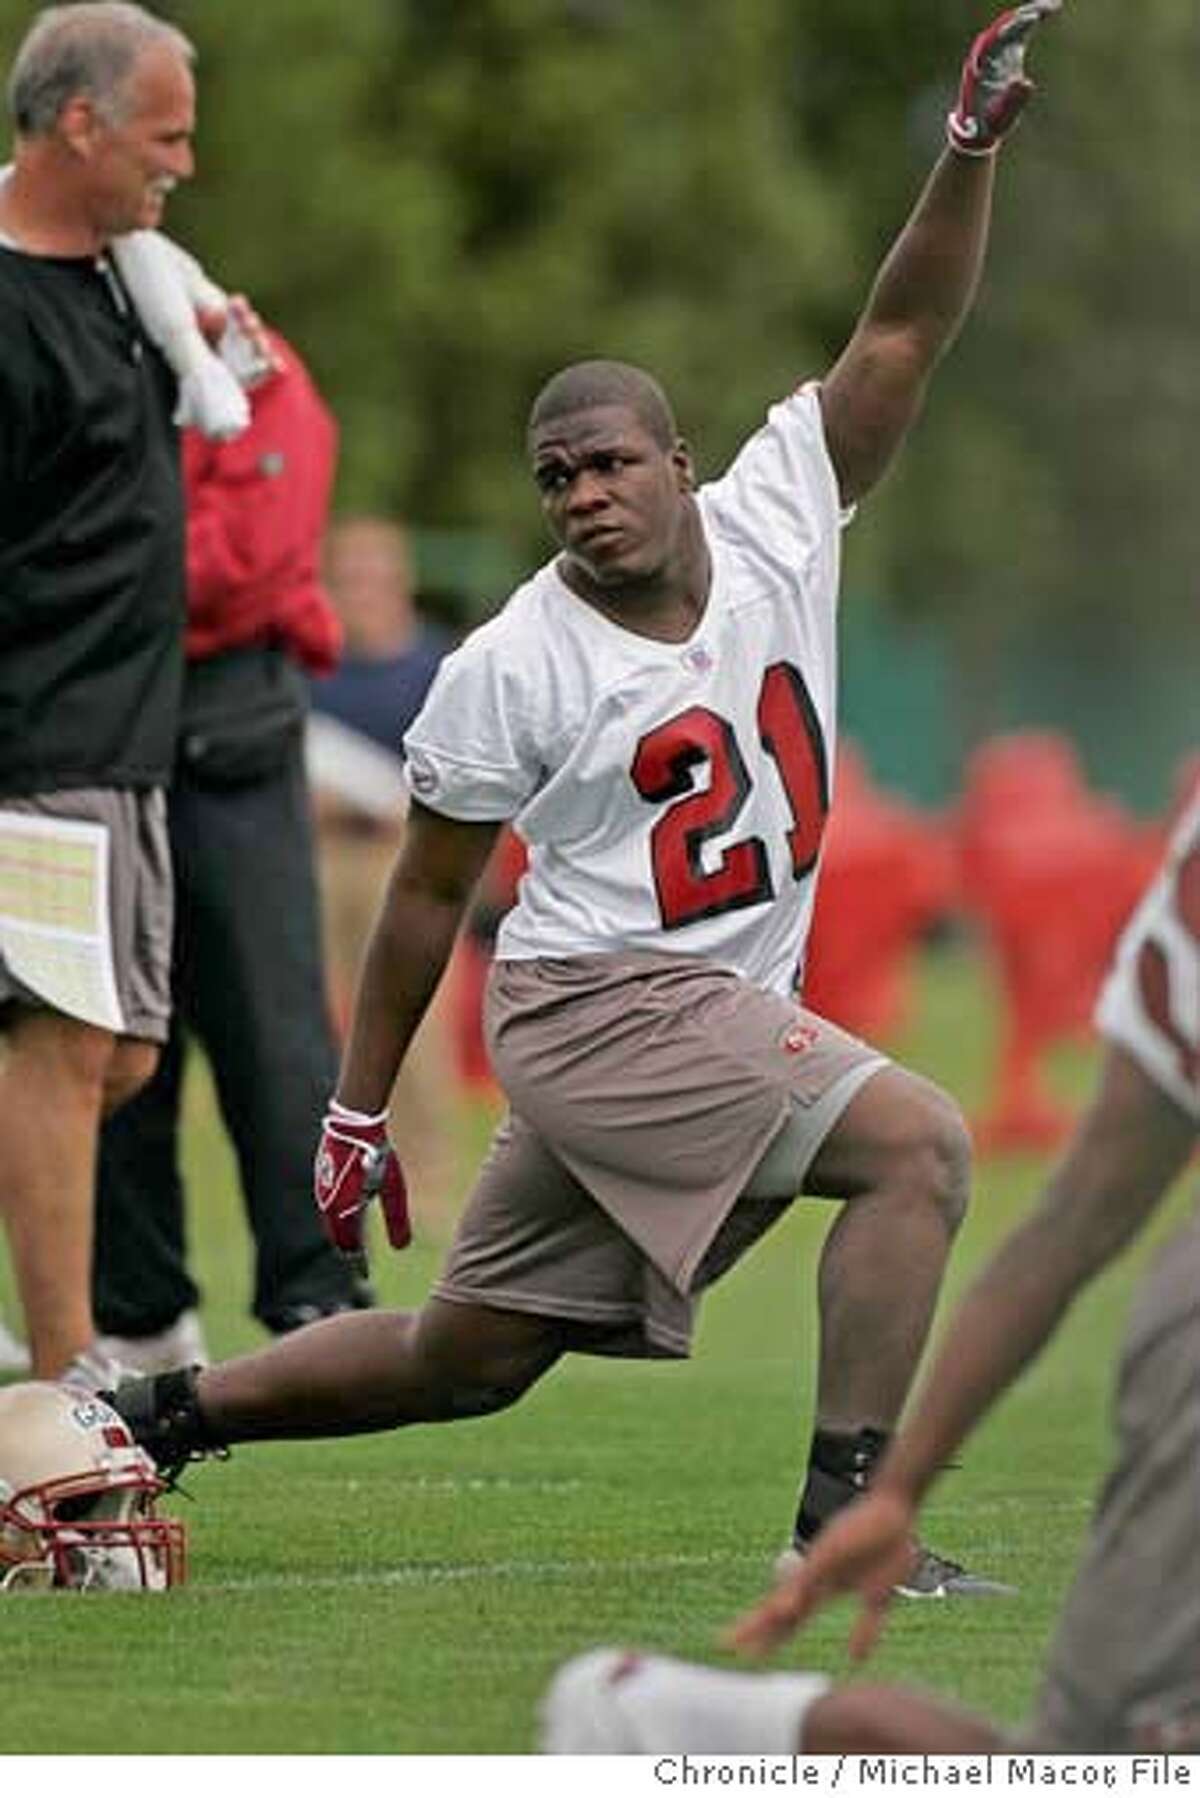 49ers_176_mac.jpg Warm ups, 21-Frank Gore. San Francisco 49ers hold their first mandatory mini-camp of the season. Chance to see new players, coach Mike Nolan at work. 5/6/05 Santa Clara, Ca Michael Macor / San Francisco Chronicle Ran on: 10-21-2005 Frank Gore Ran on: 10-21-2005 Frank Gore Mandatory Credit for Photographer and San Francisco Chronicle/ - Magazine Out